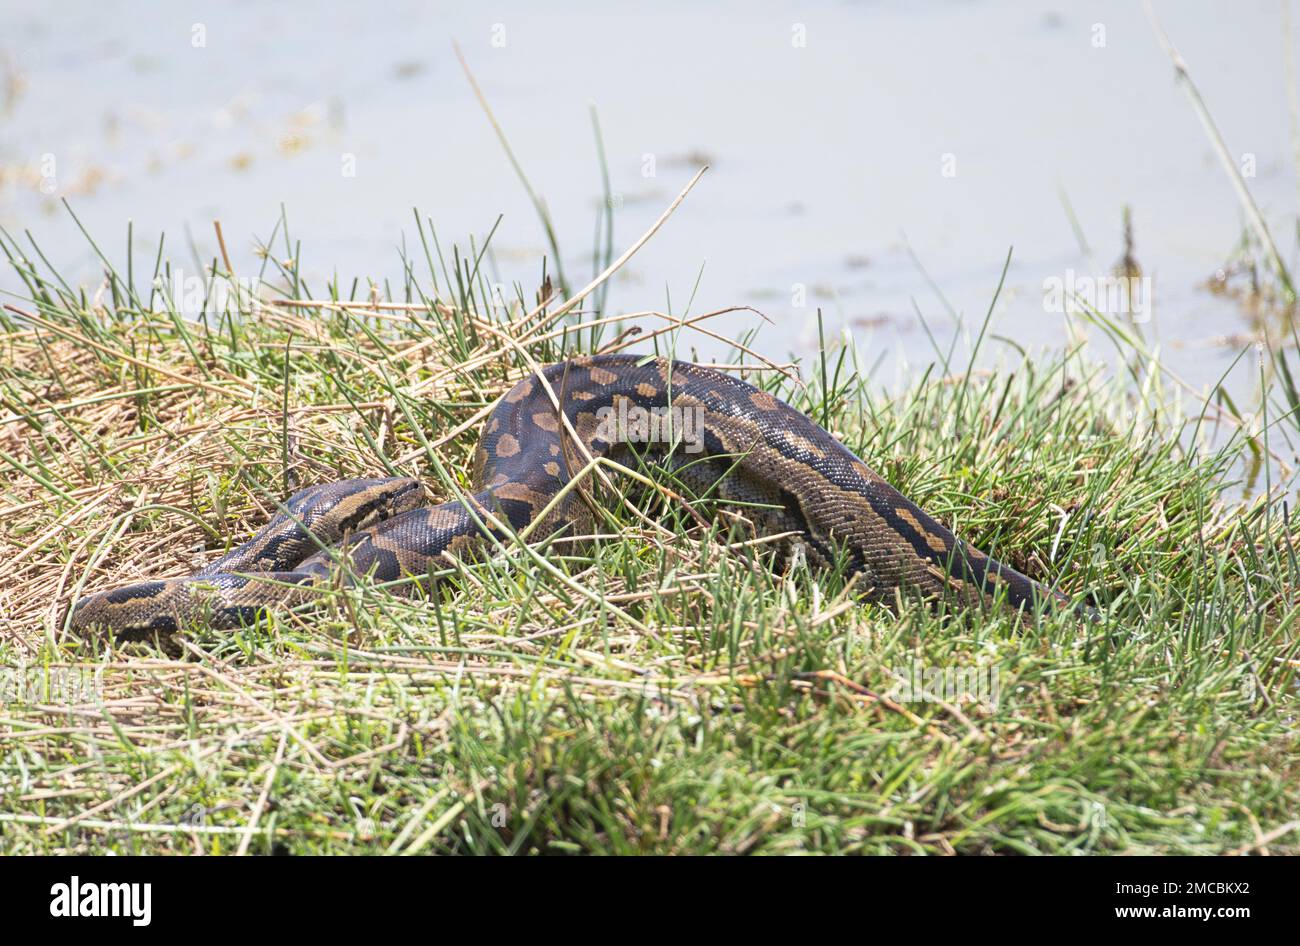 Southern African rock python (Python natalensis) emerging from a freshwater lake Stock Photo